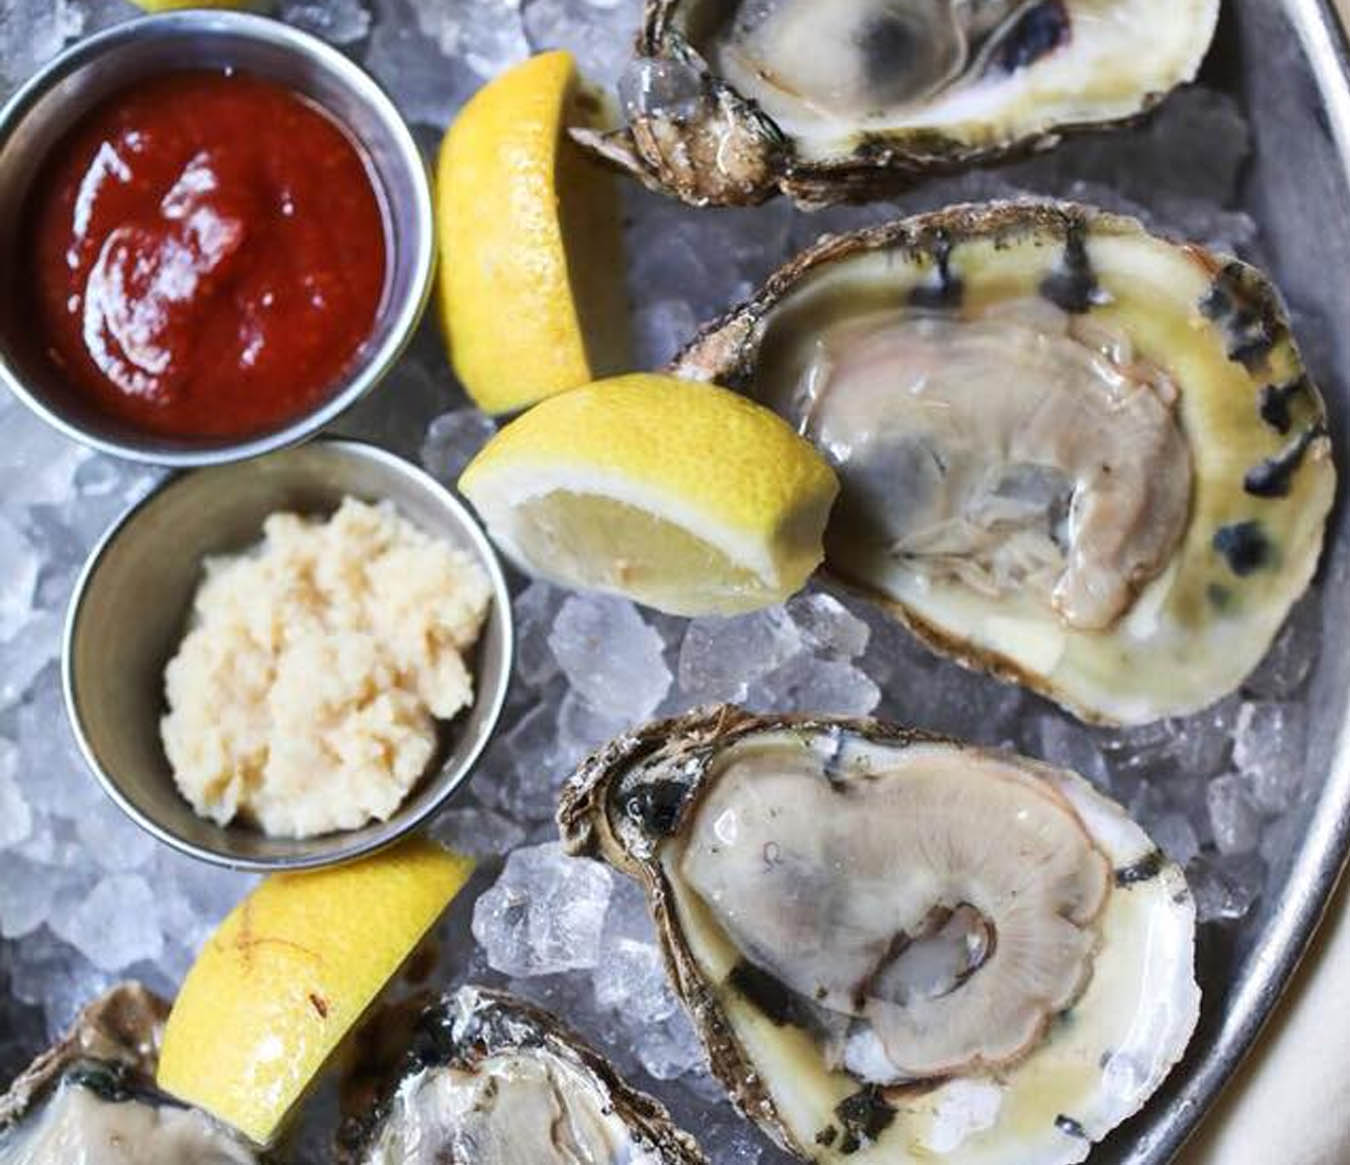 Where To Eat In Nashville - The Southern Steak & Oyster 